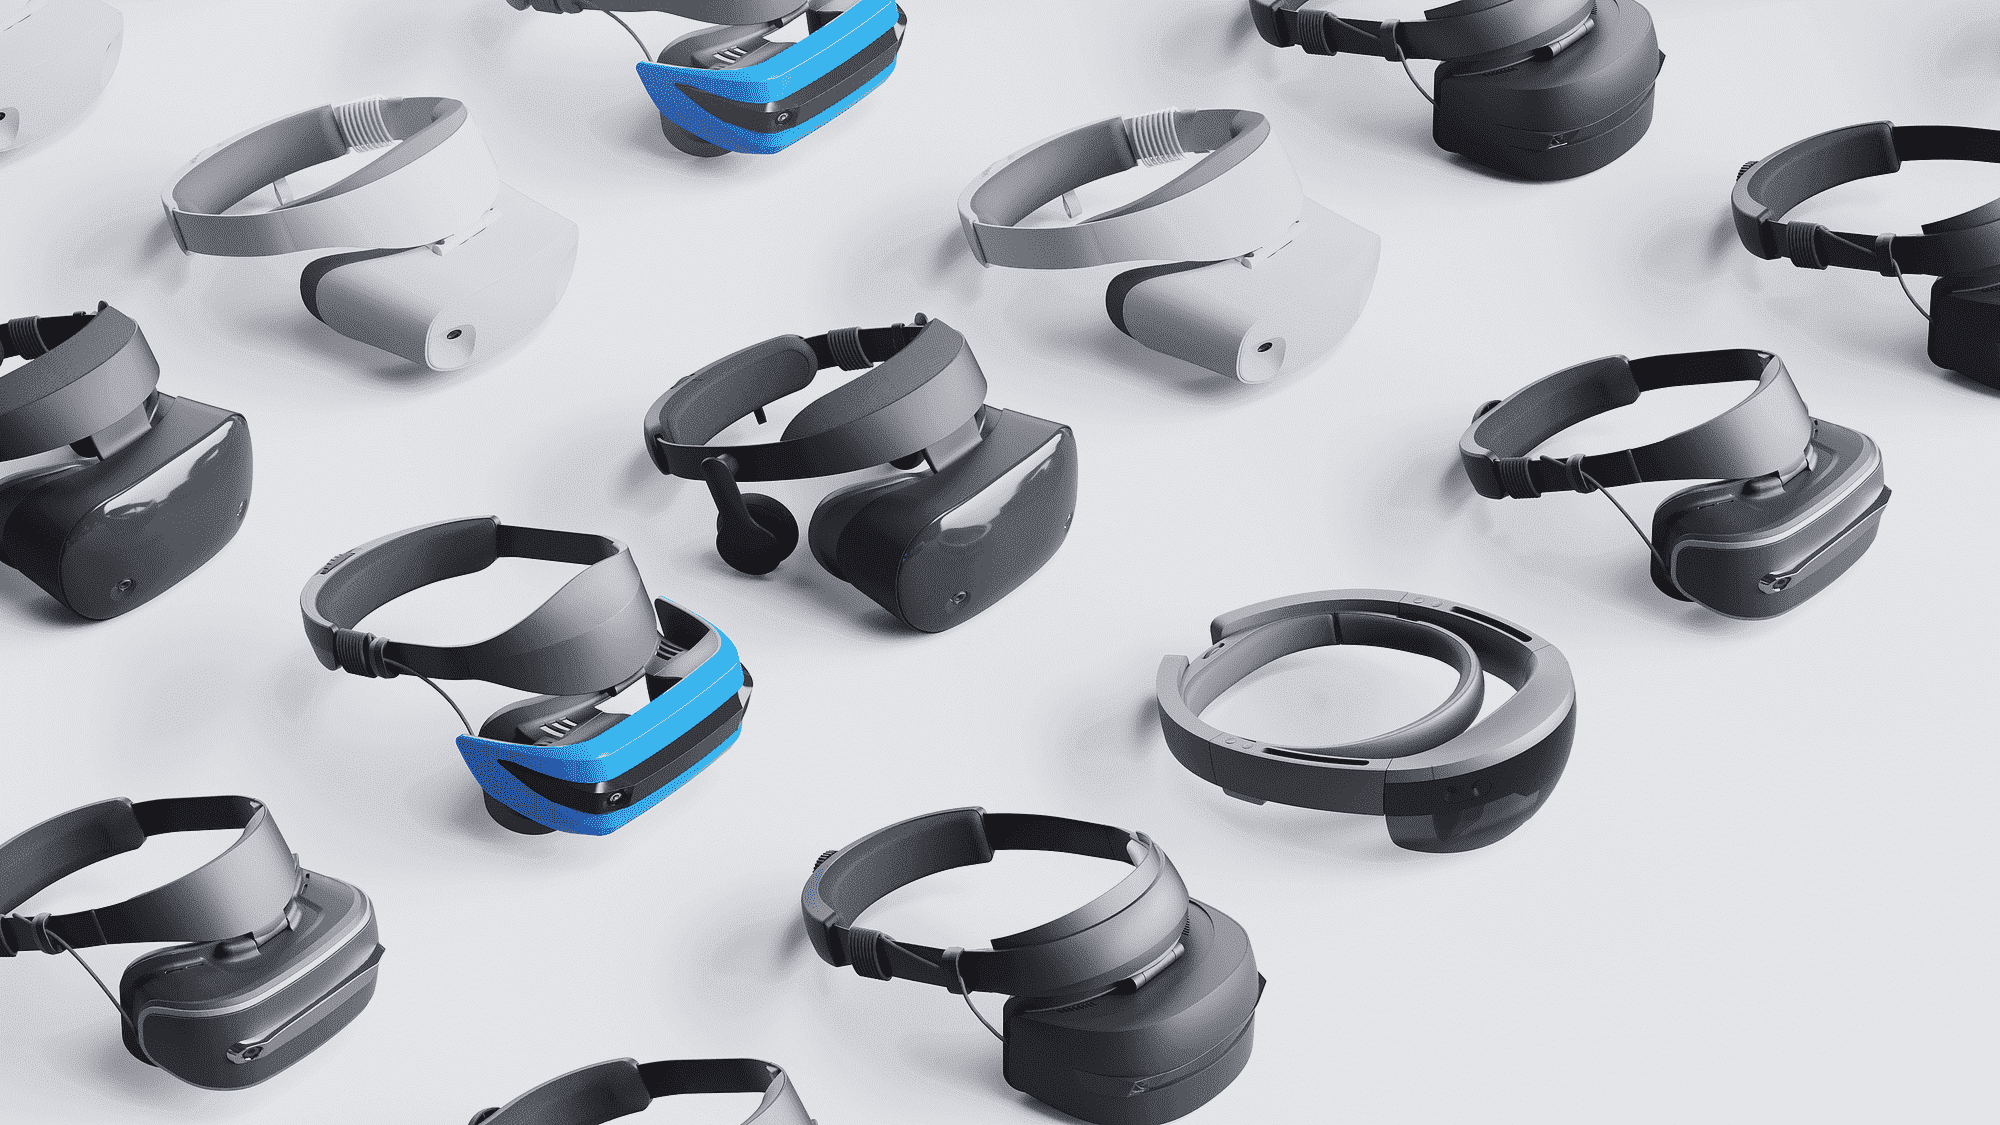 Samsung HMD Odyssey+ Windows Mixed Reality headset spotted online 0a0457fc5a5116bcffbb969fbc359cb5.png